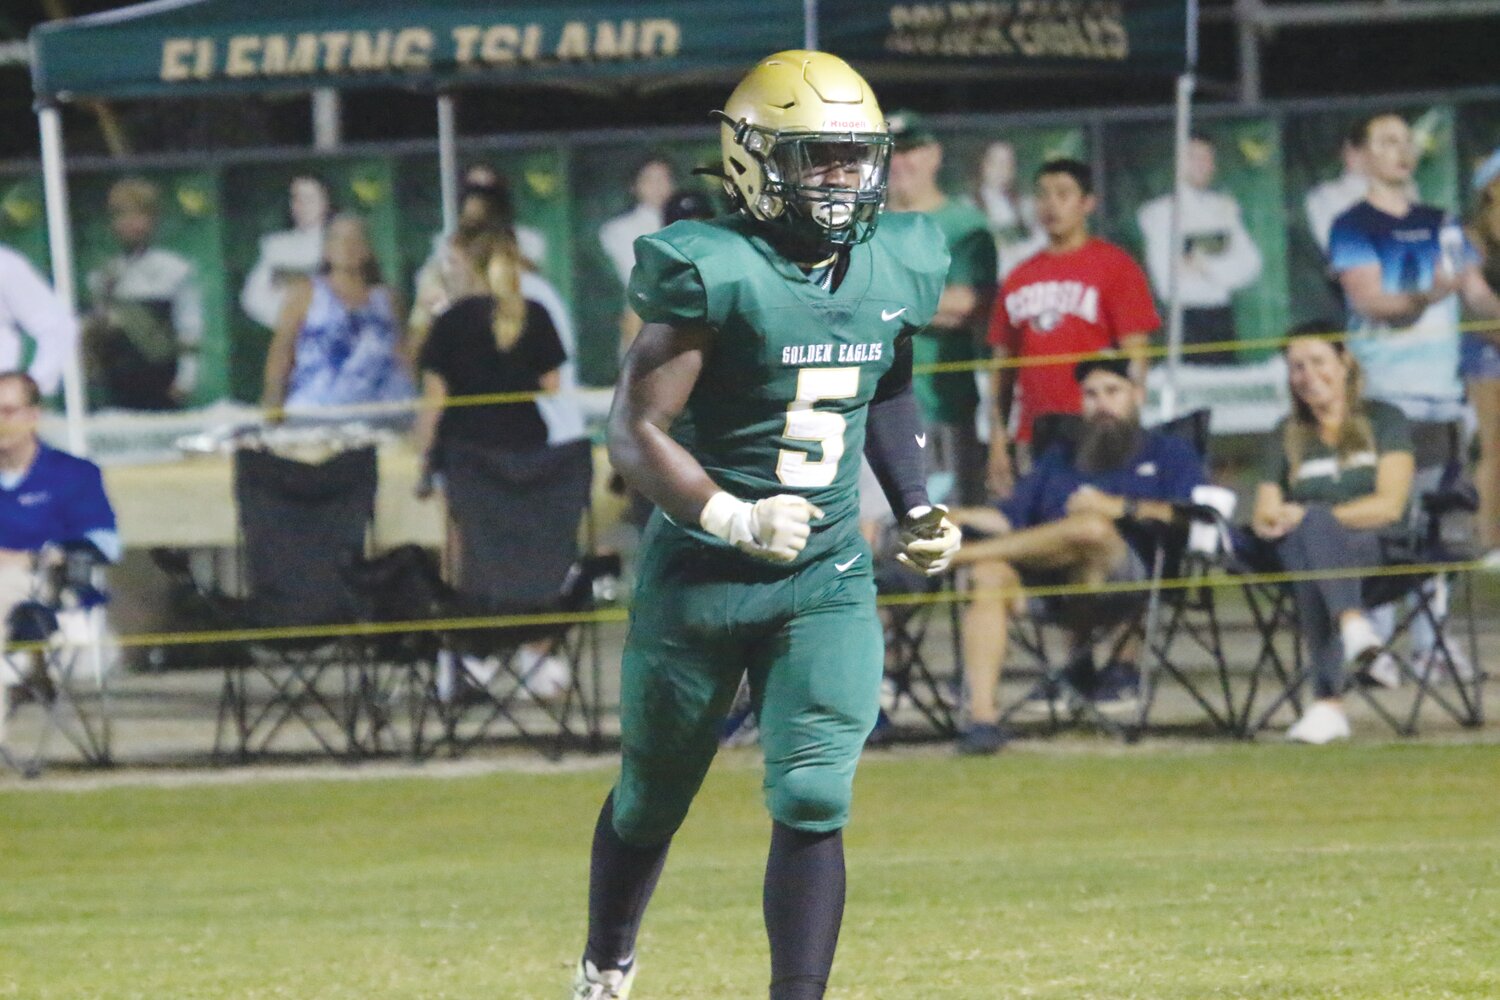 The running back war will feature Tyler Beverly, No. 5 for Fleming Island, and Chris Foy II, No. 0 for Oakleaf, both big, strong powerful downhill runners.